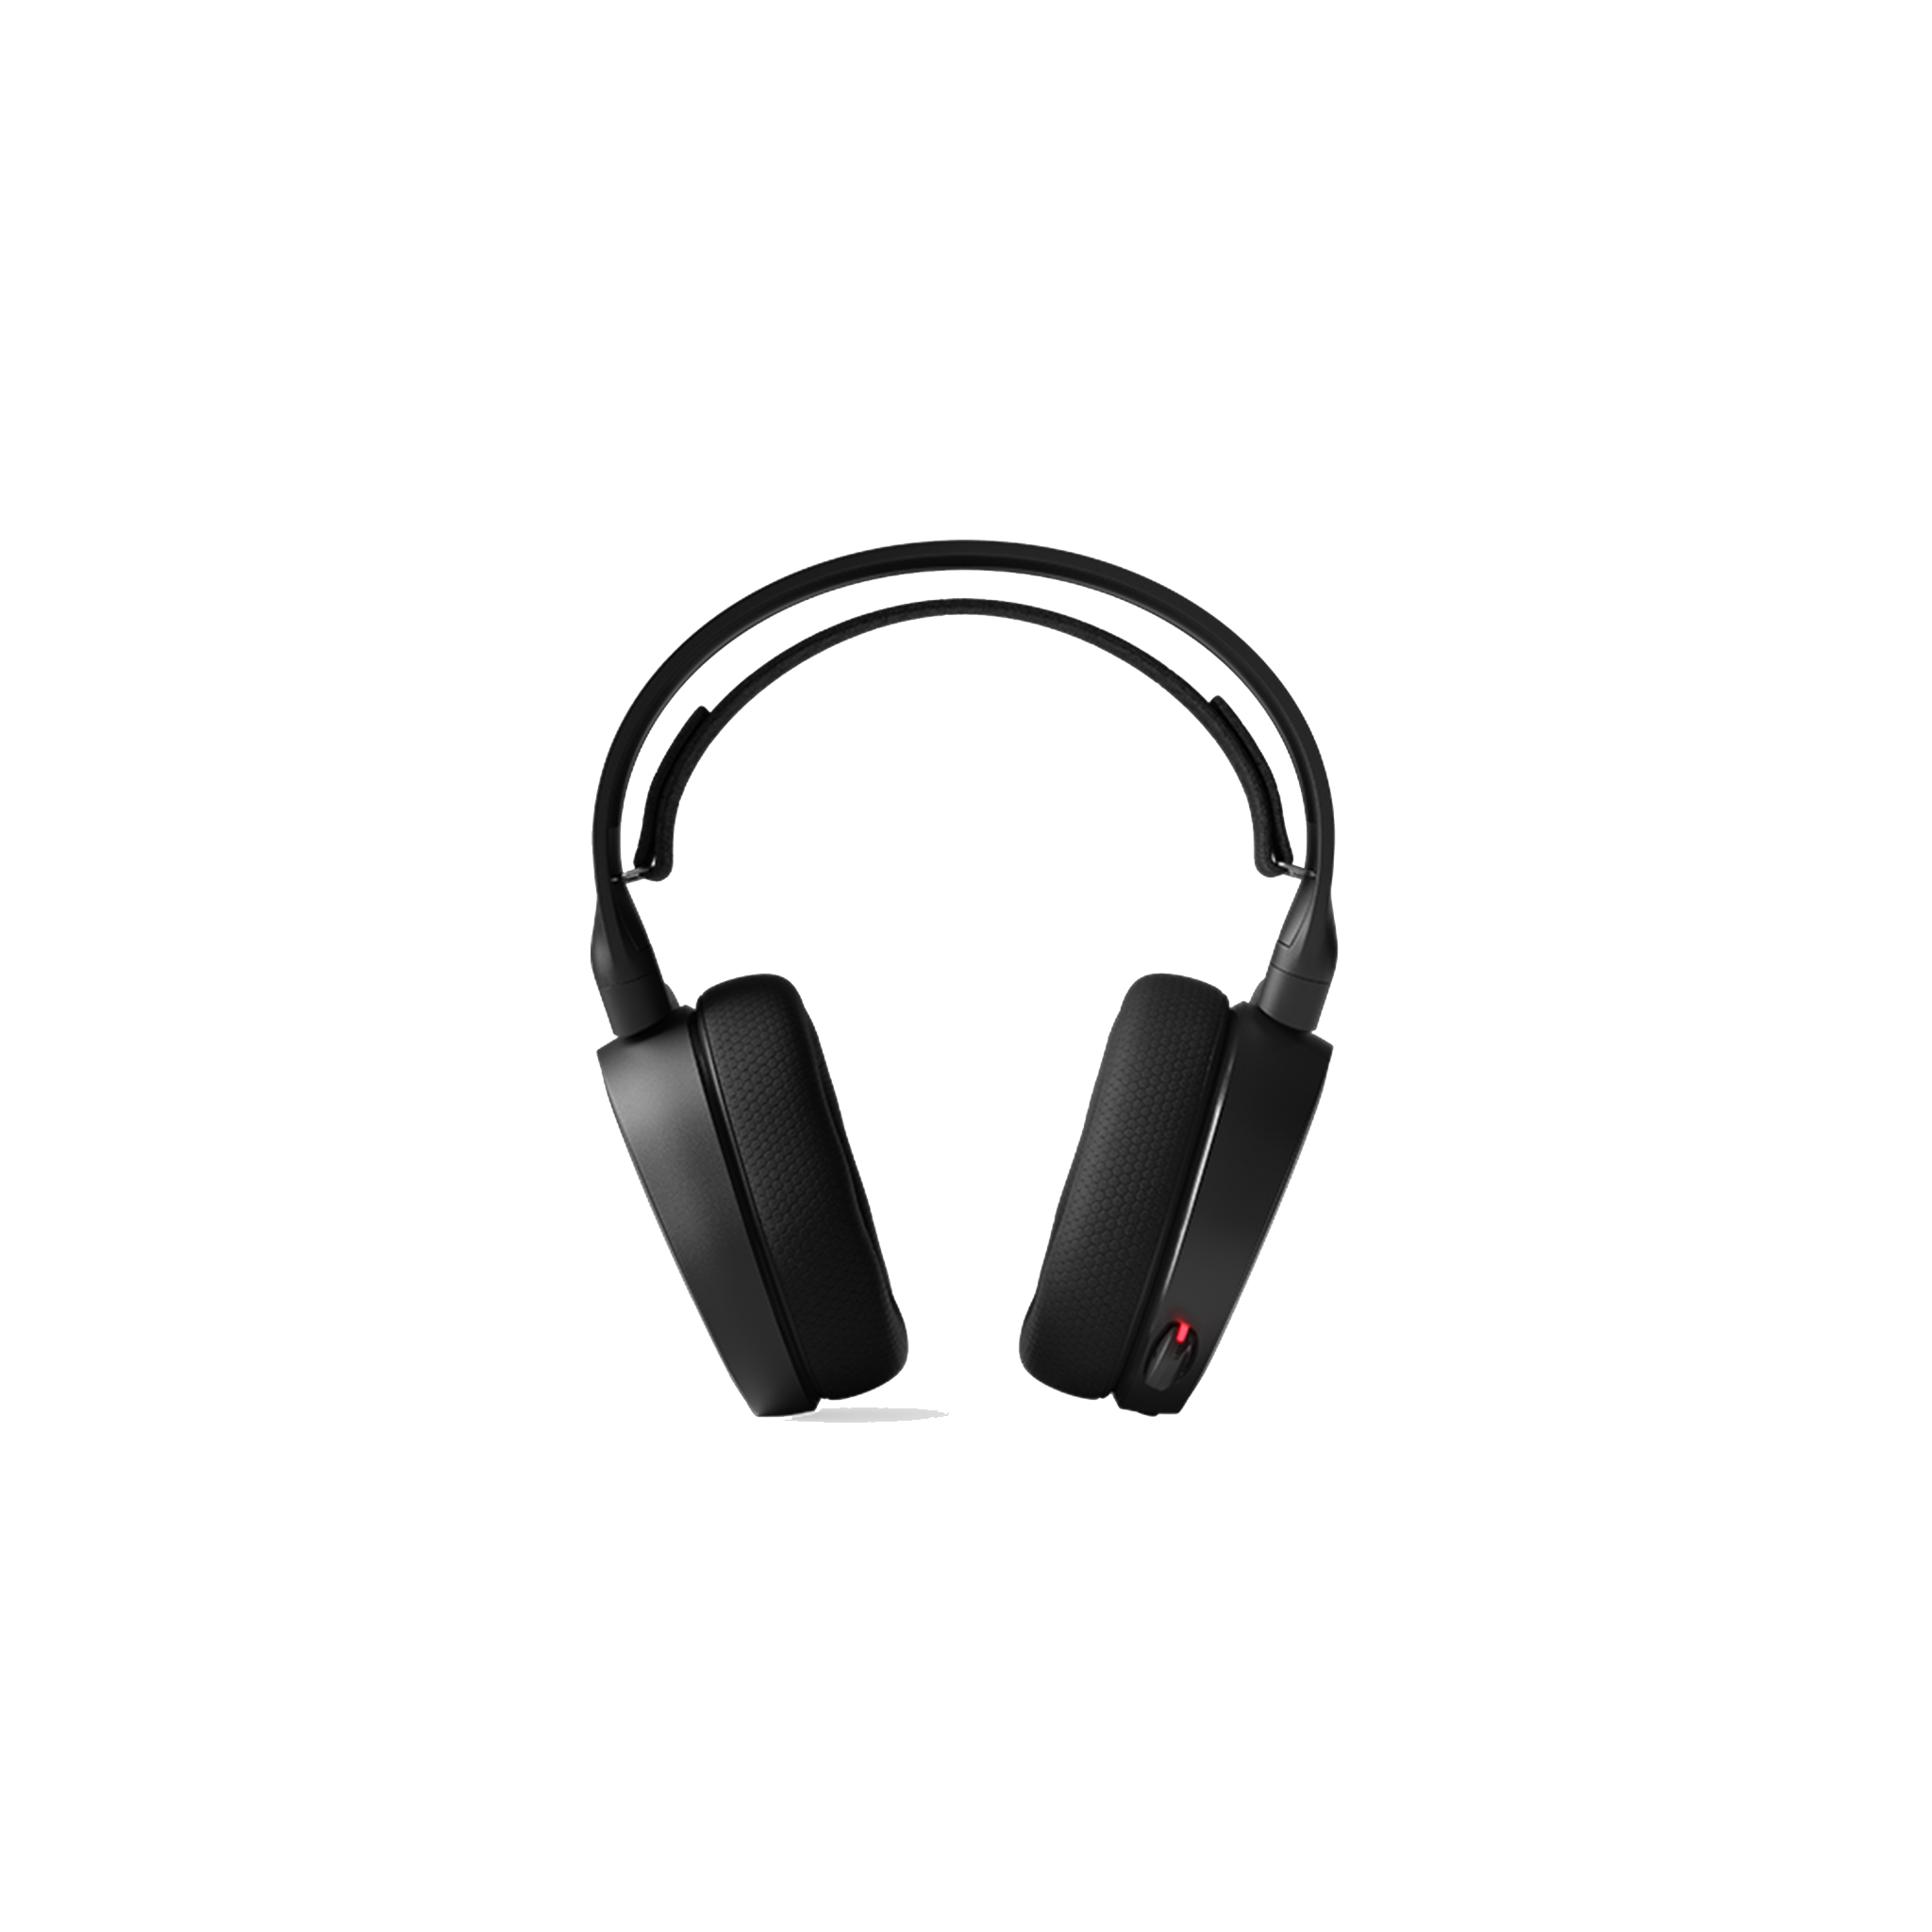 SteelSeries Gaming Headset Arctis 3 (2019 Edition)